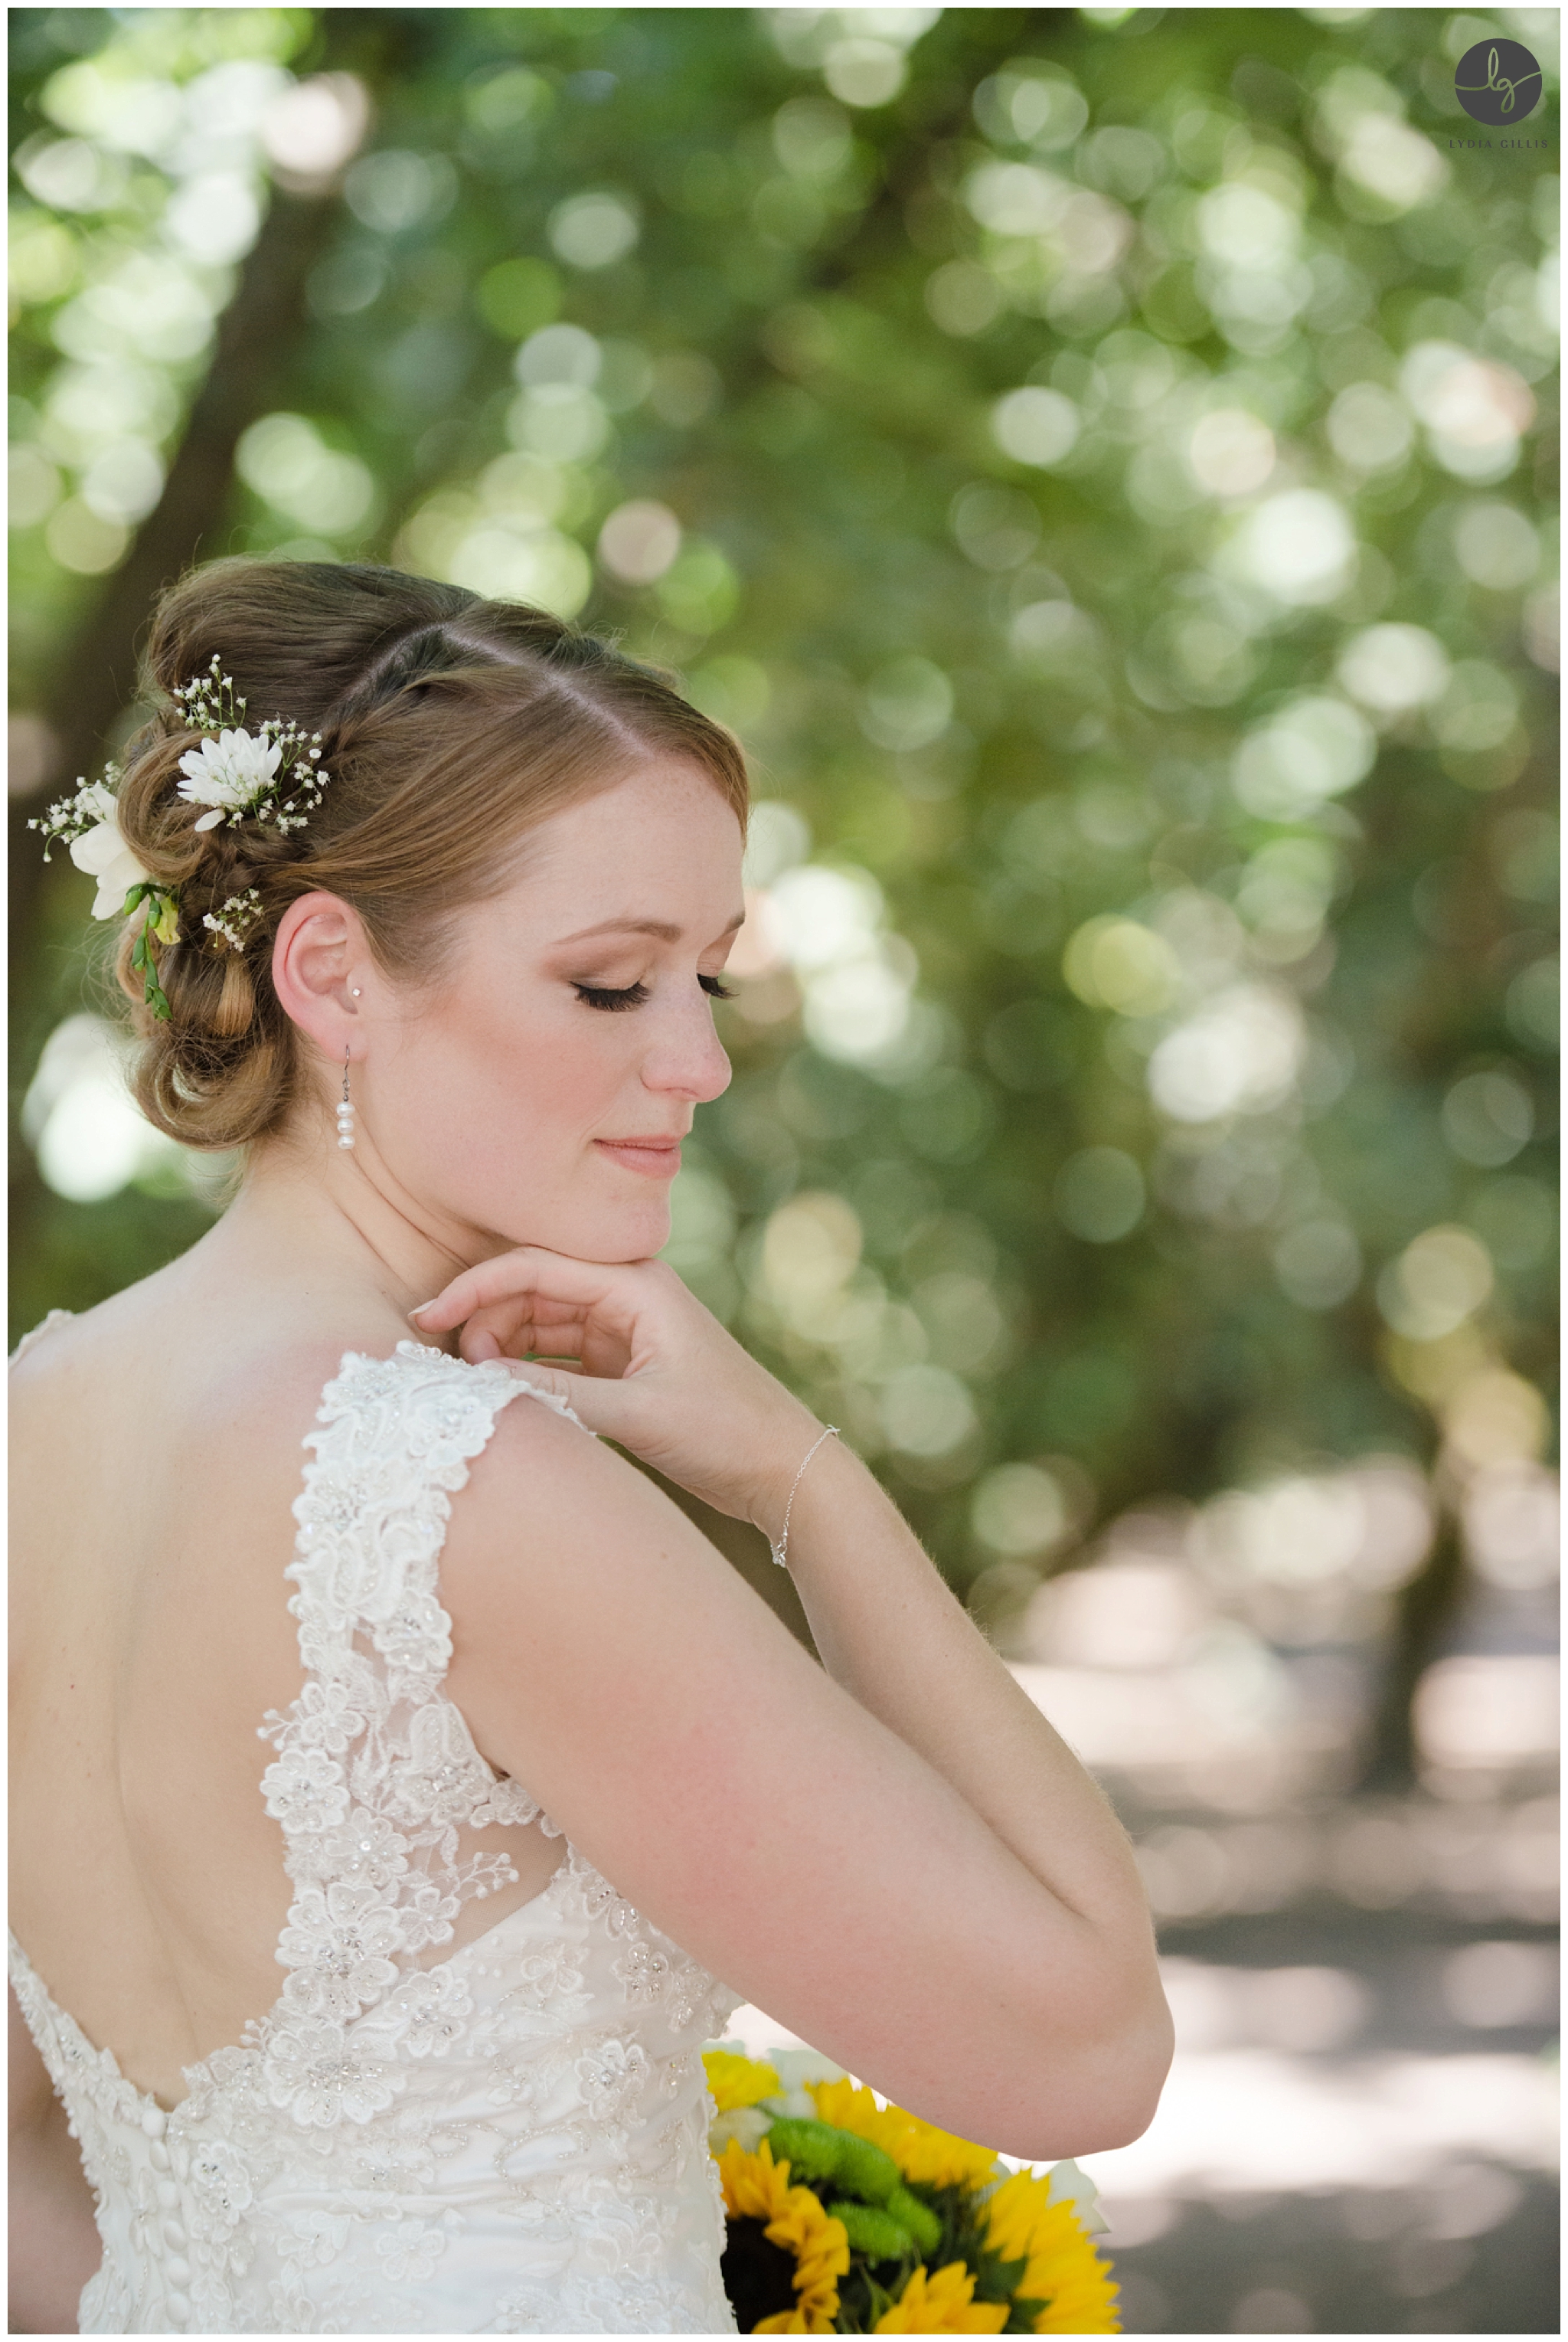 outdoor wedding picture the bride | Lydia Gillis Photography 